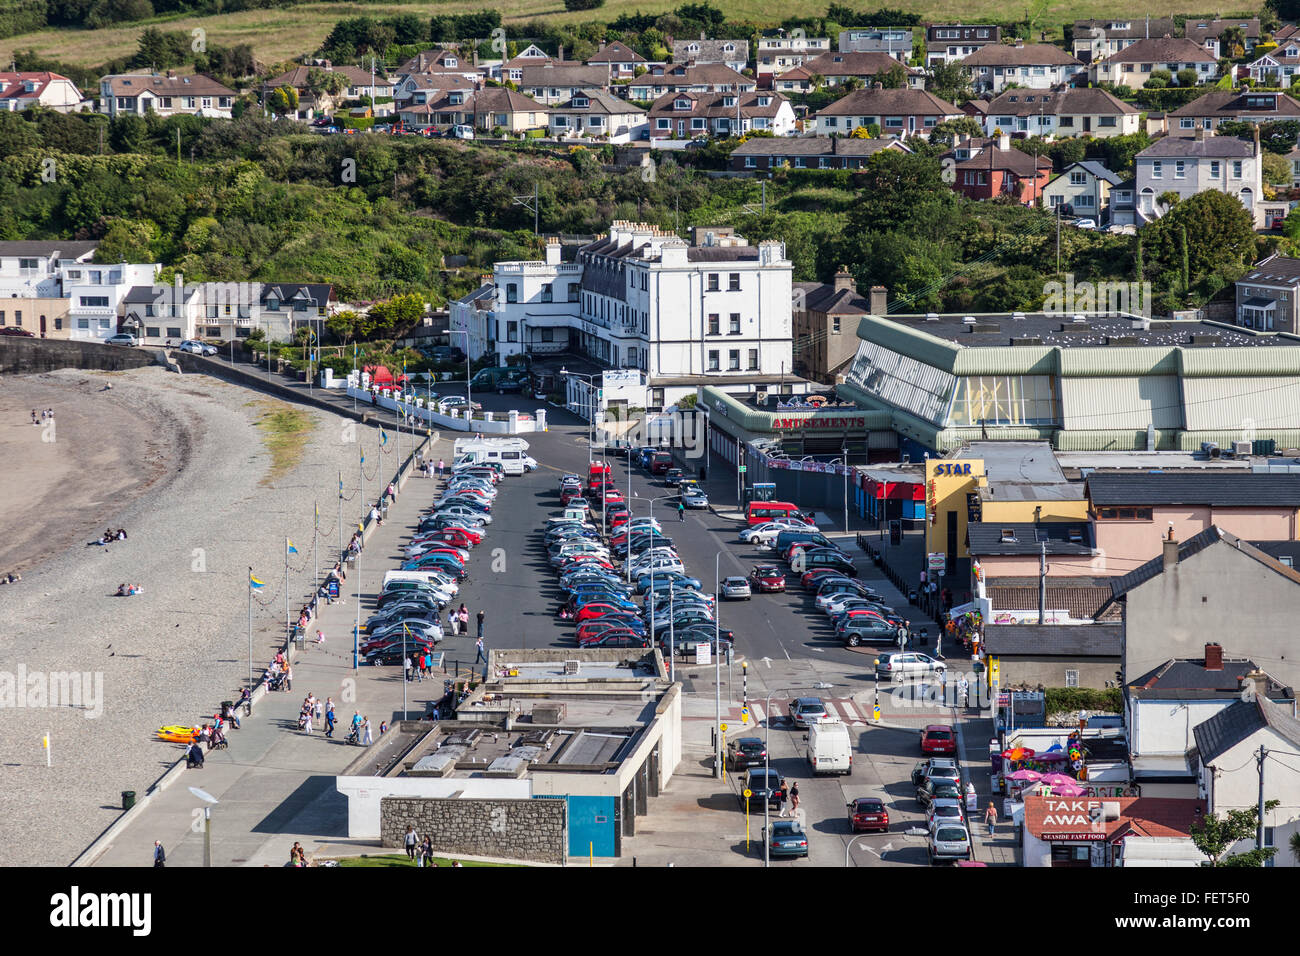 Elevated view looking north along Strand Road and the promenade, Bray, County Wicklow, Republic of Ireland. Stock Photo